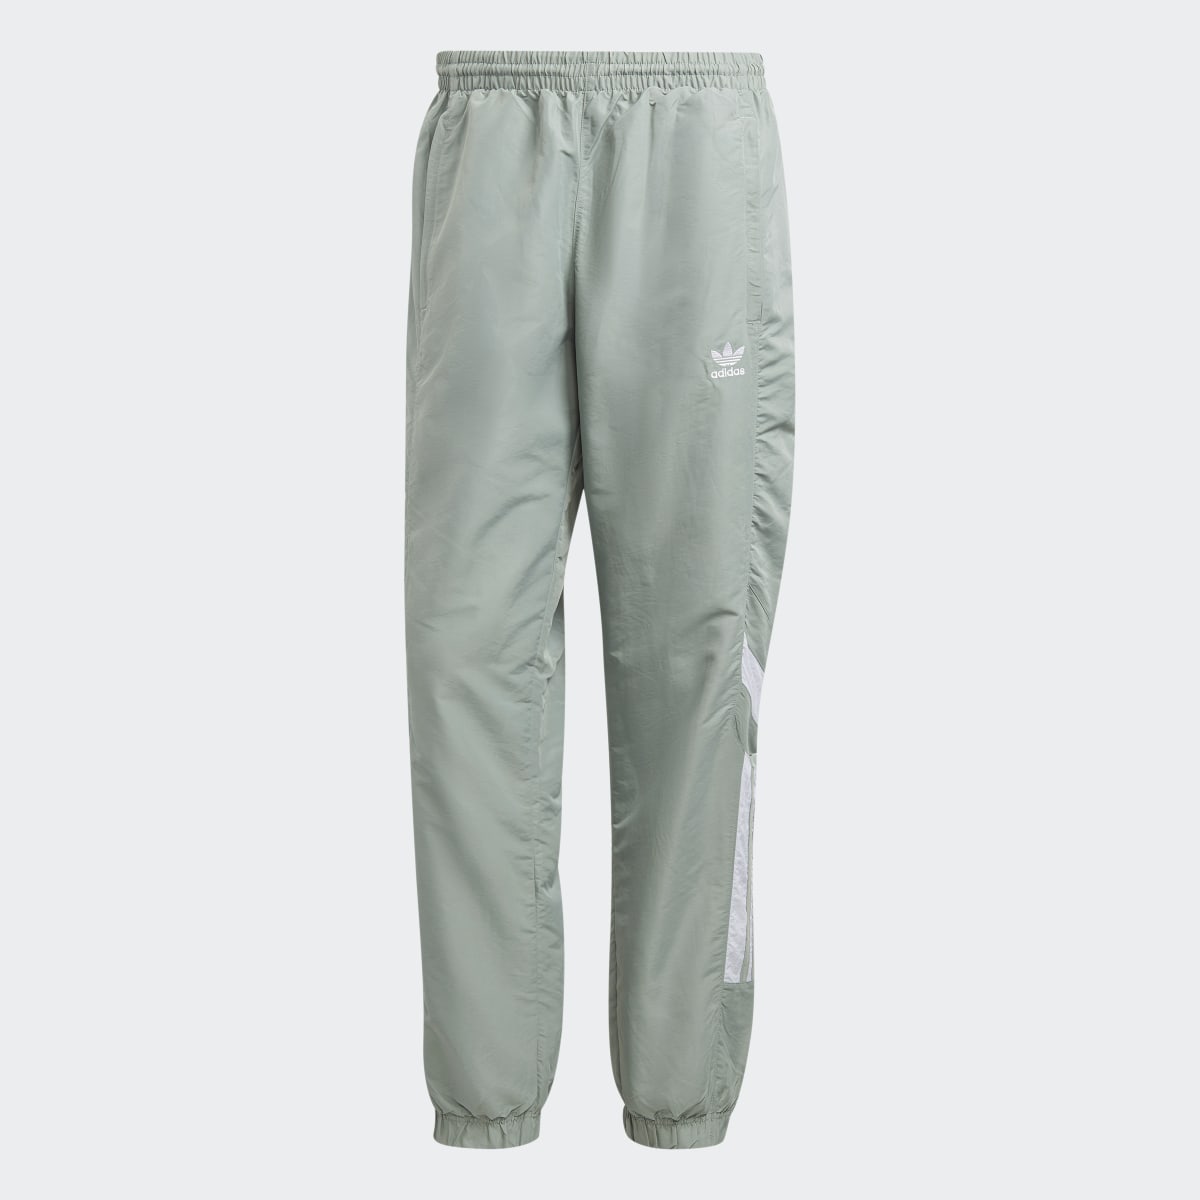 Adidas Rekive Woven Track Tracksuit Bottoms. 5